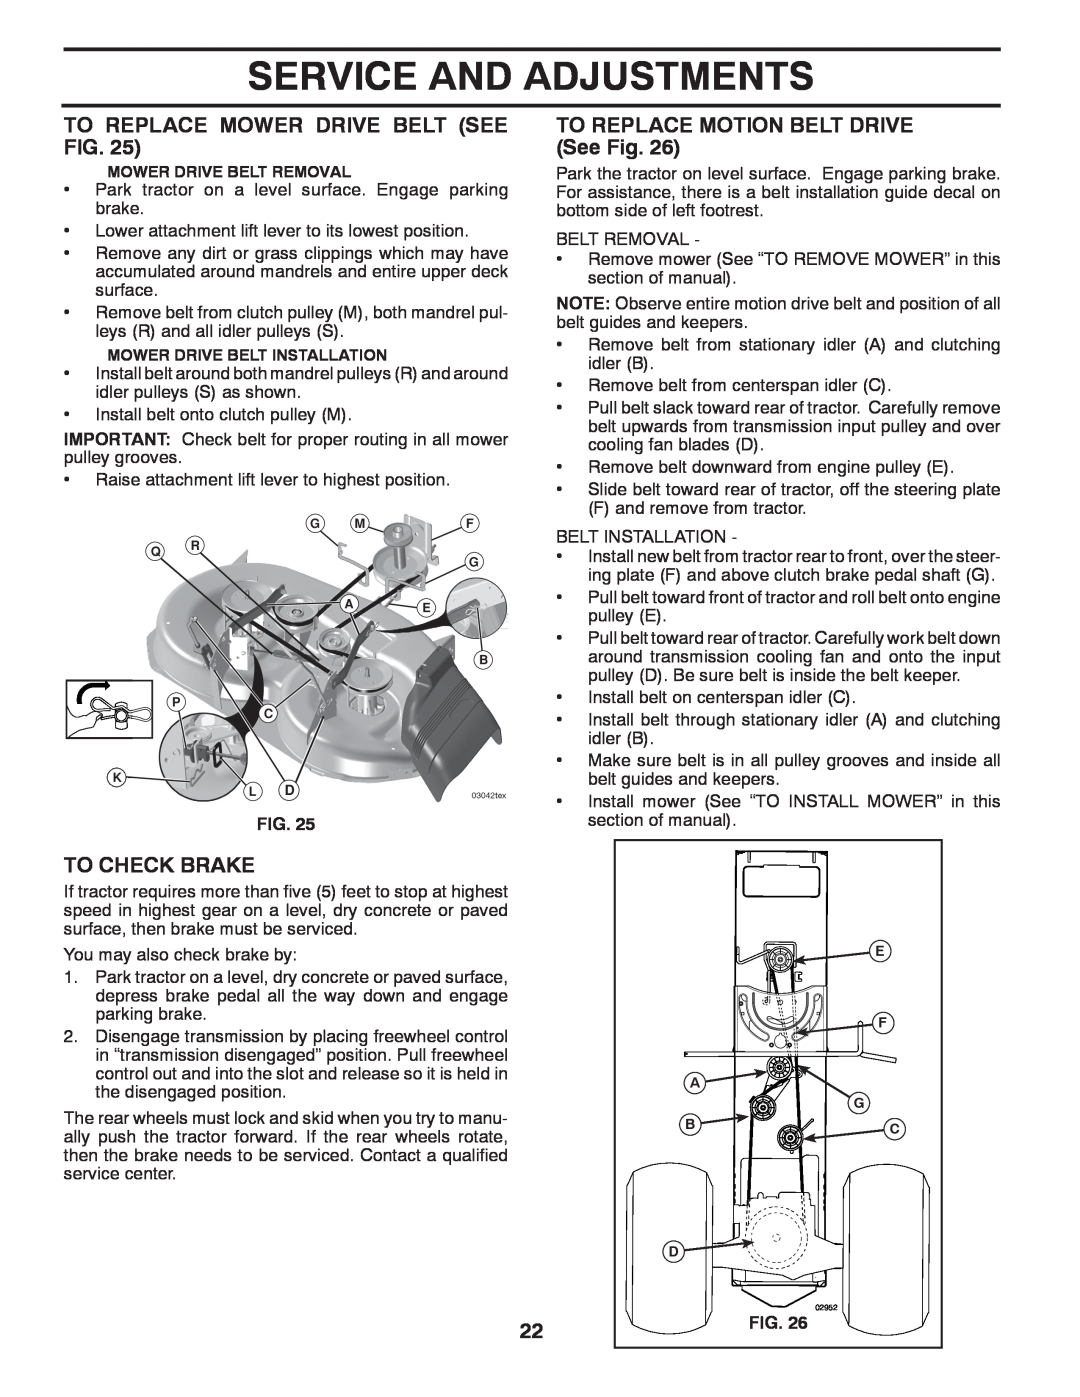 Poulan 96042004700 Service And Adjustments, To Replace Mower Drive Belt See Fig, TO REPLACE MOTION BELT DRIVE See Fig 